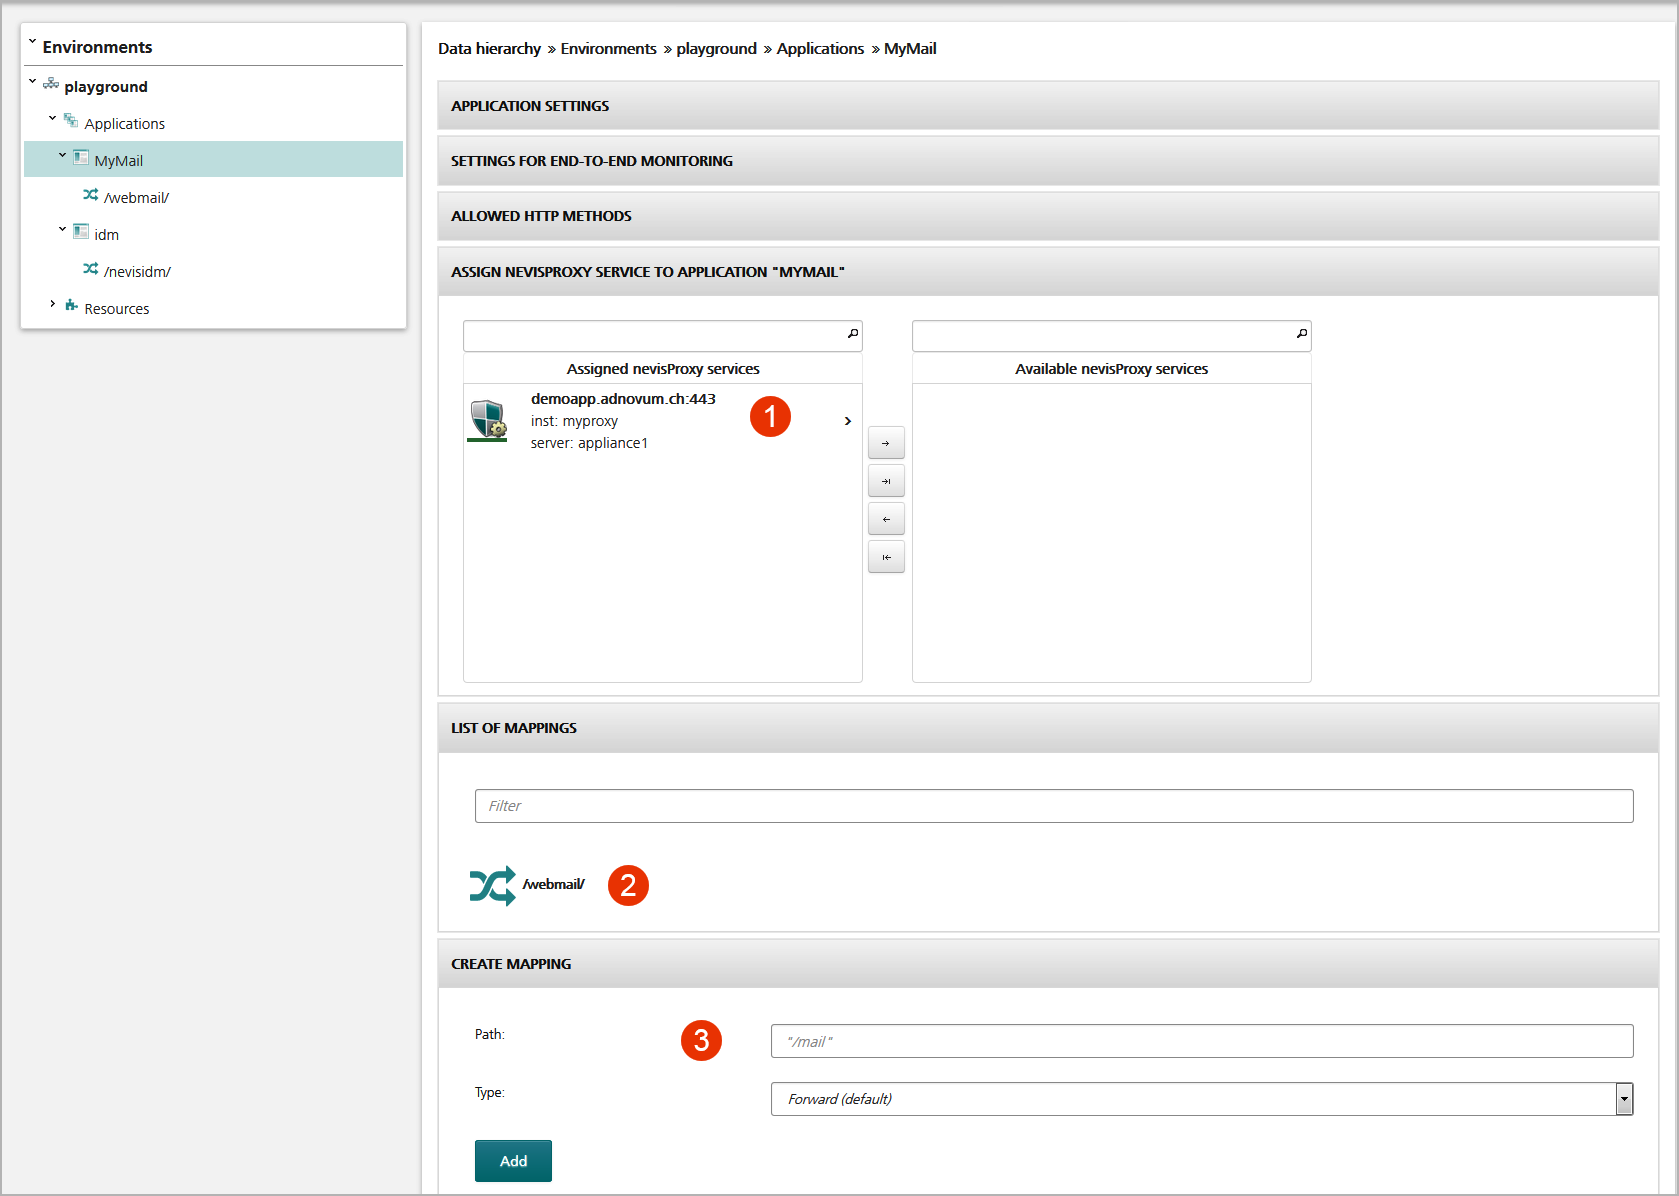 Sample application view